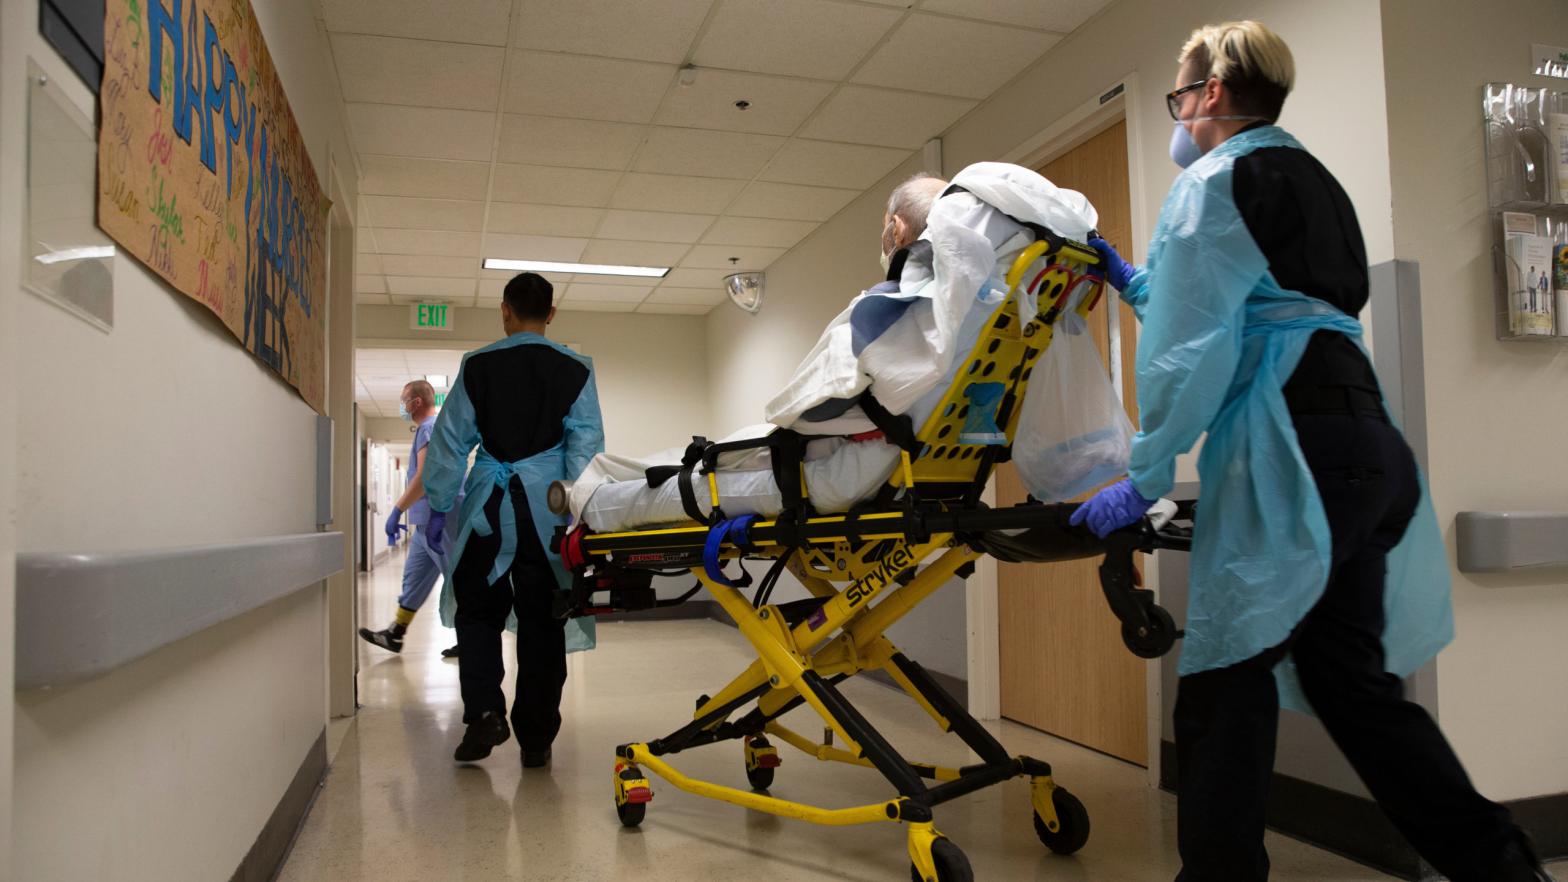 EMTs transferring a patient out of the acute care covid-19 unit at the Harborview Medical Centre in Seattle, Washington on May 7, 2020 (Photo: Karen Ducey, Getty Images)